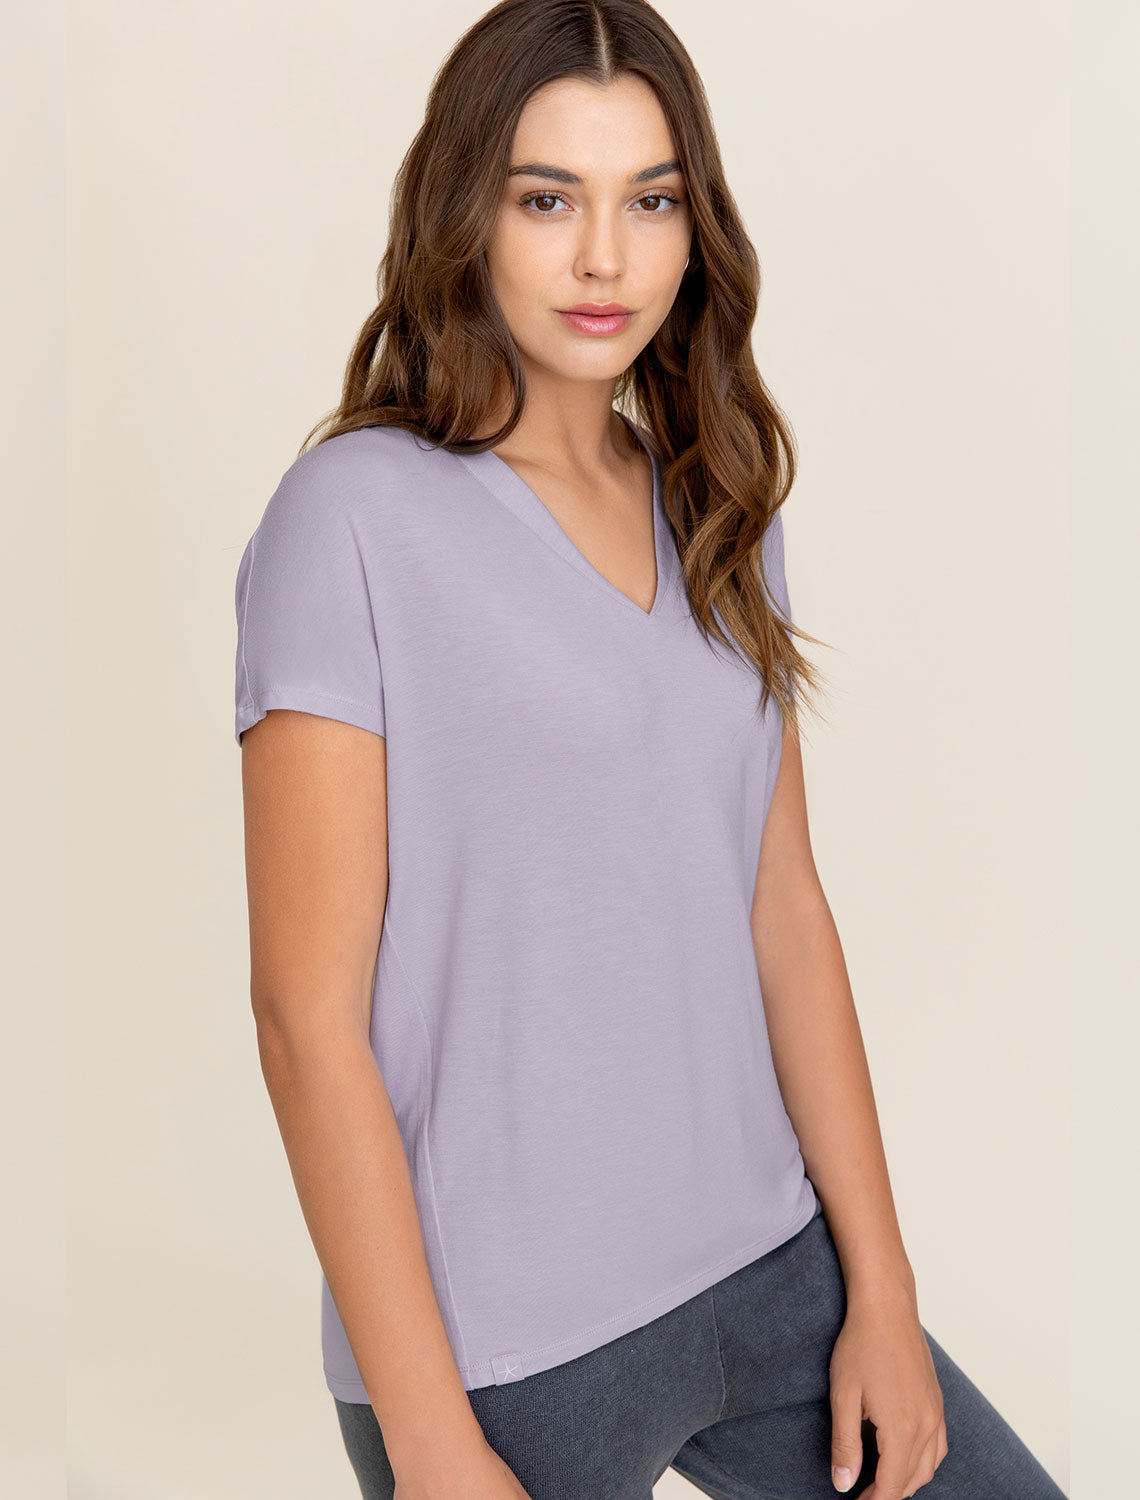 Malibu Collection® Set of 2 Short Sleeve Tees, Pewter / Soft Violet / XS